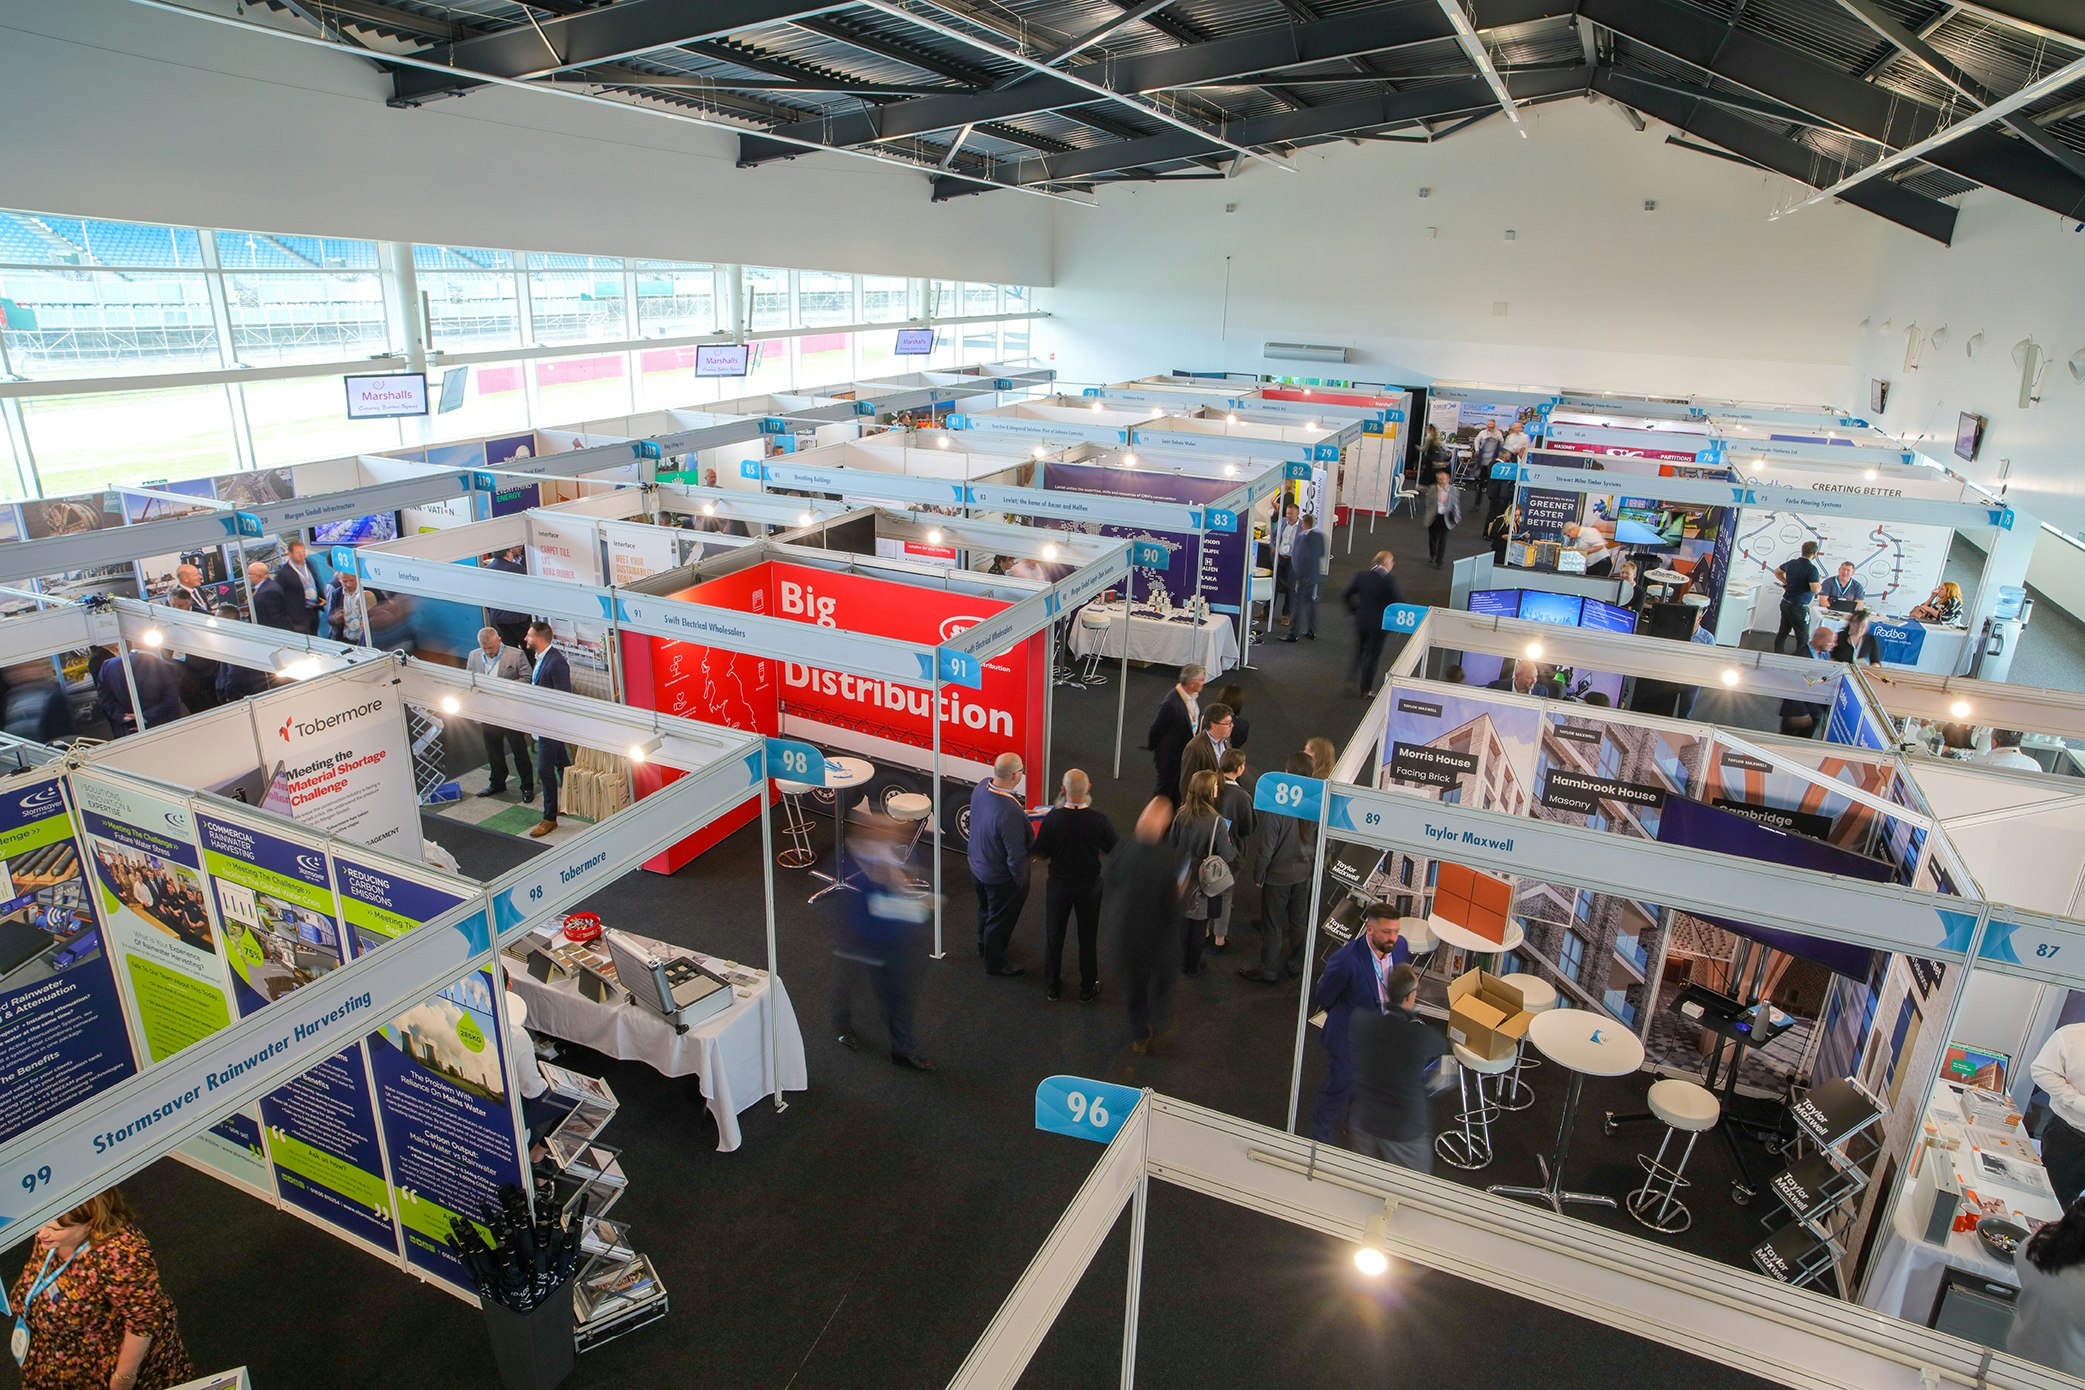 Silverstone International Conference & Exhibition Centre - Hall 2 image 2